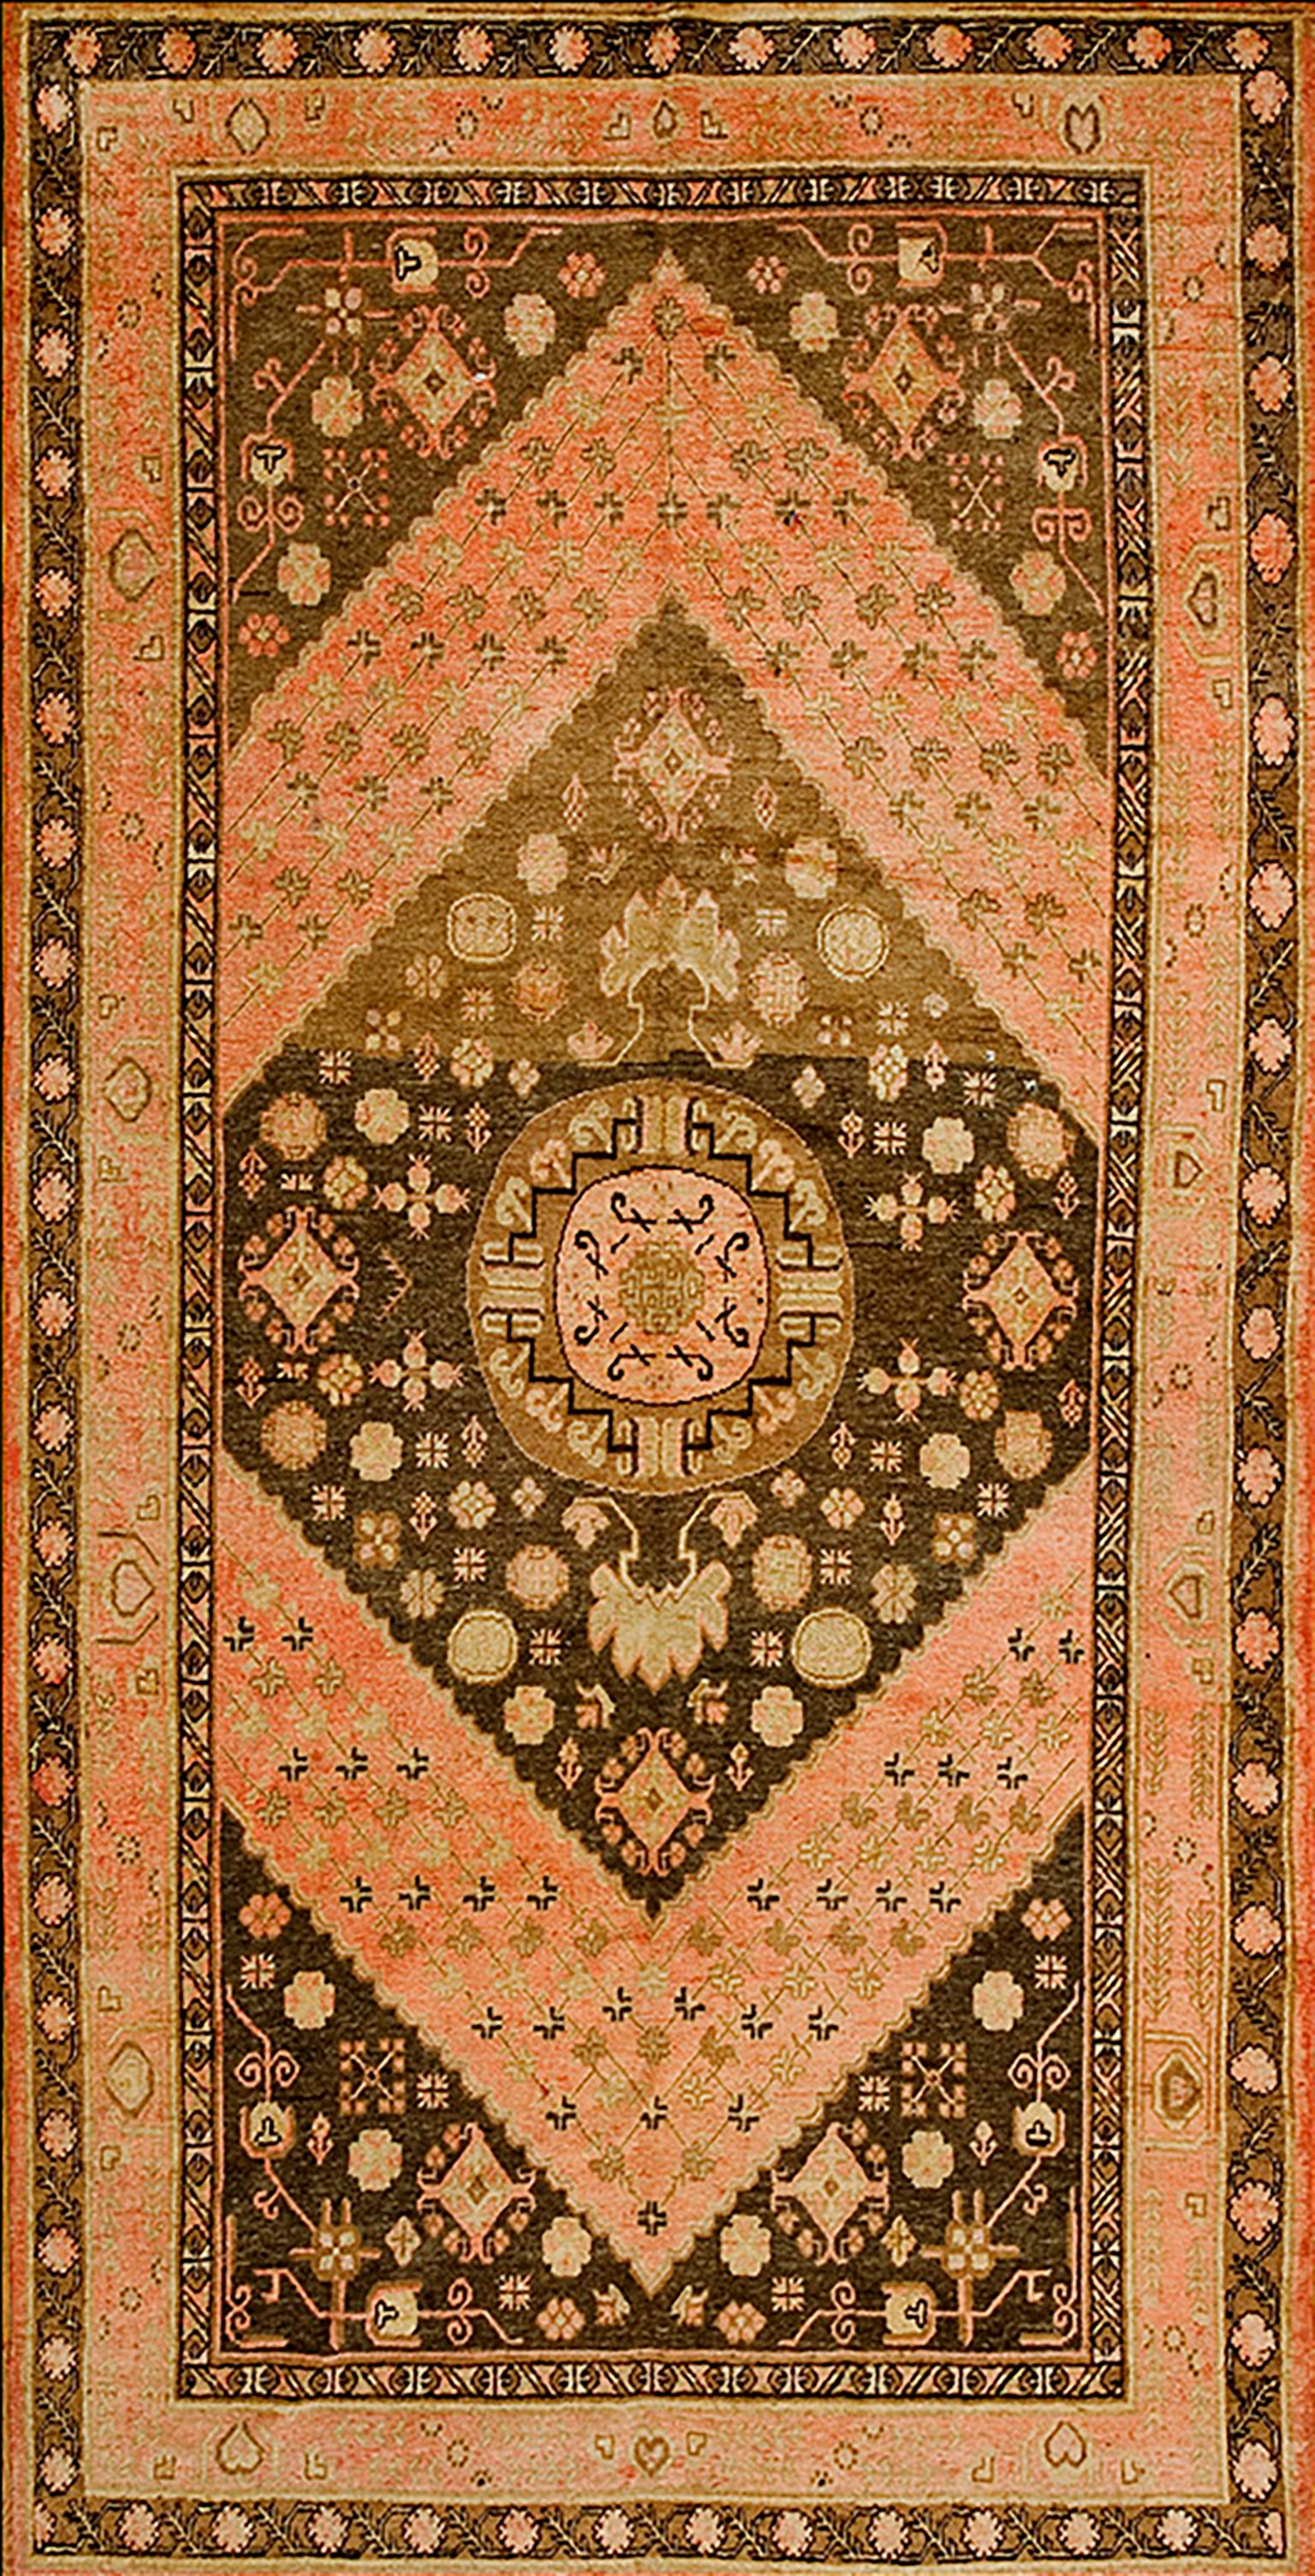 Early 20th Century Central Asian Khotan Carpet ( 5'6" x 10' - 168 x 305 ) For Sale